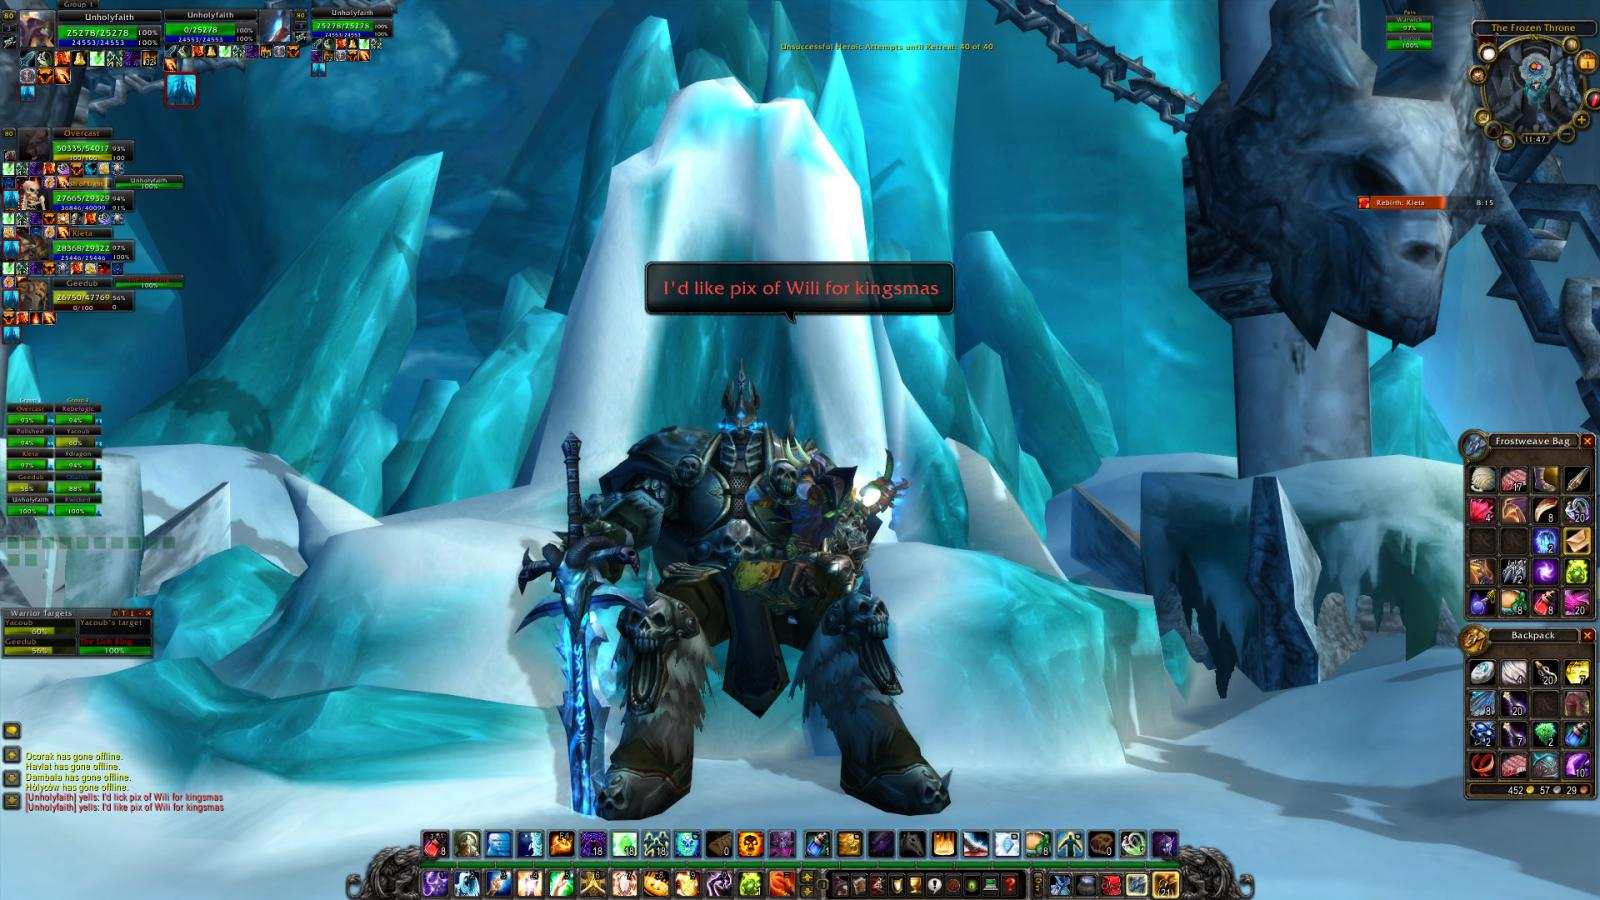 Asking Lichking for gifts